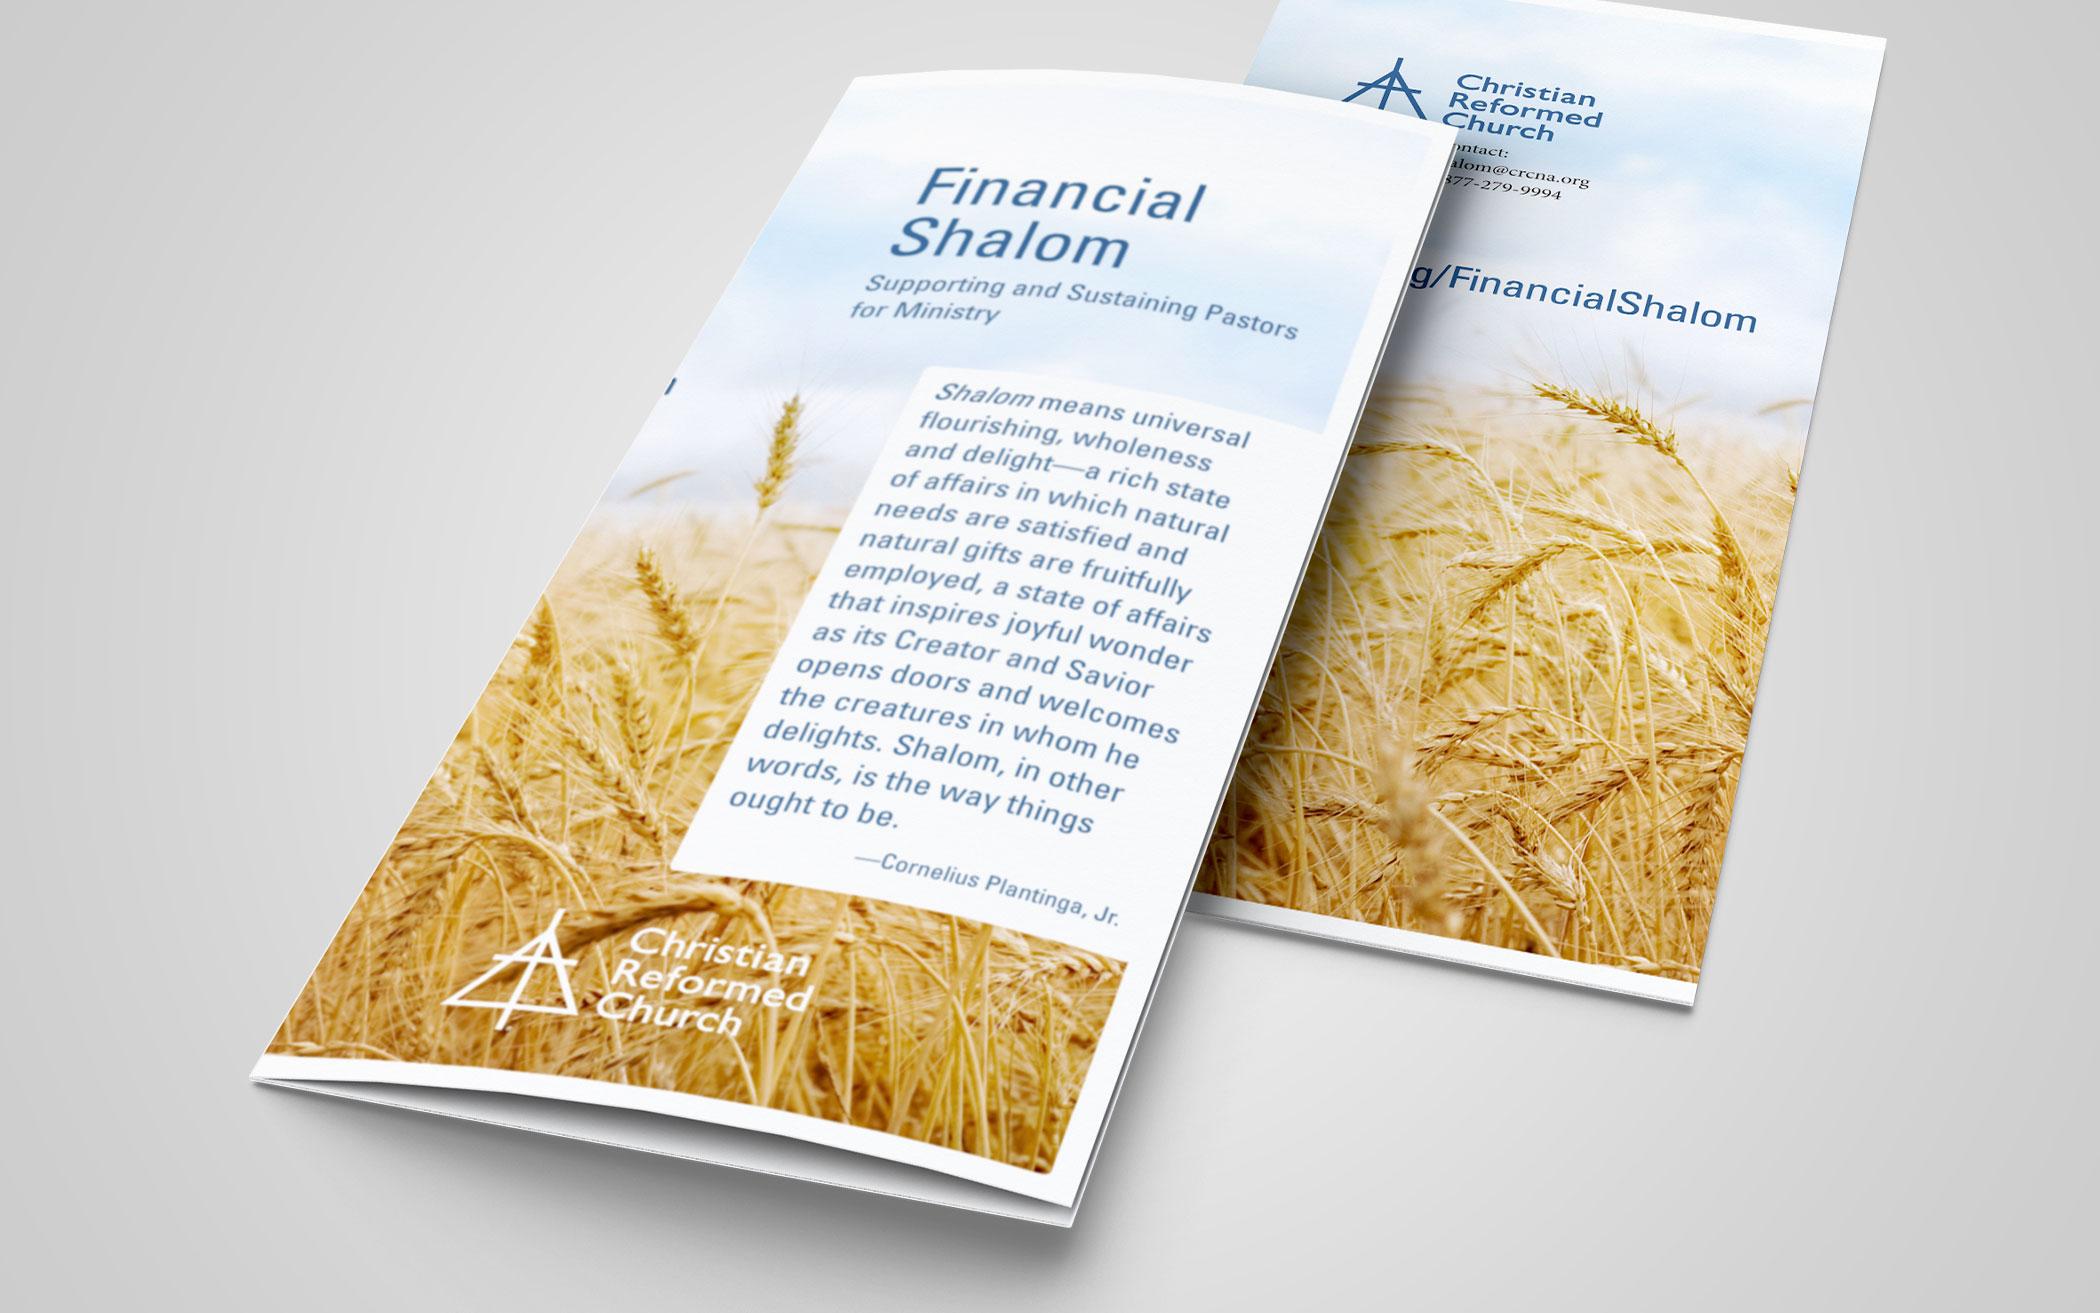 Program Fosters Financial Shalom for Pastors and Churches